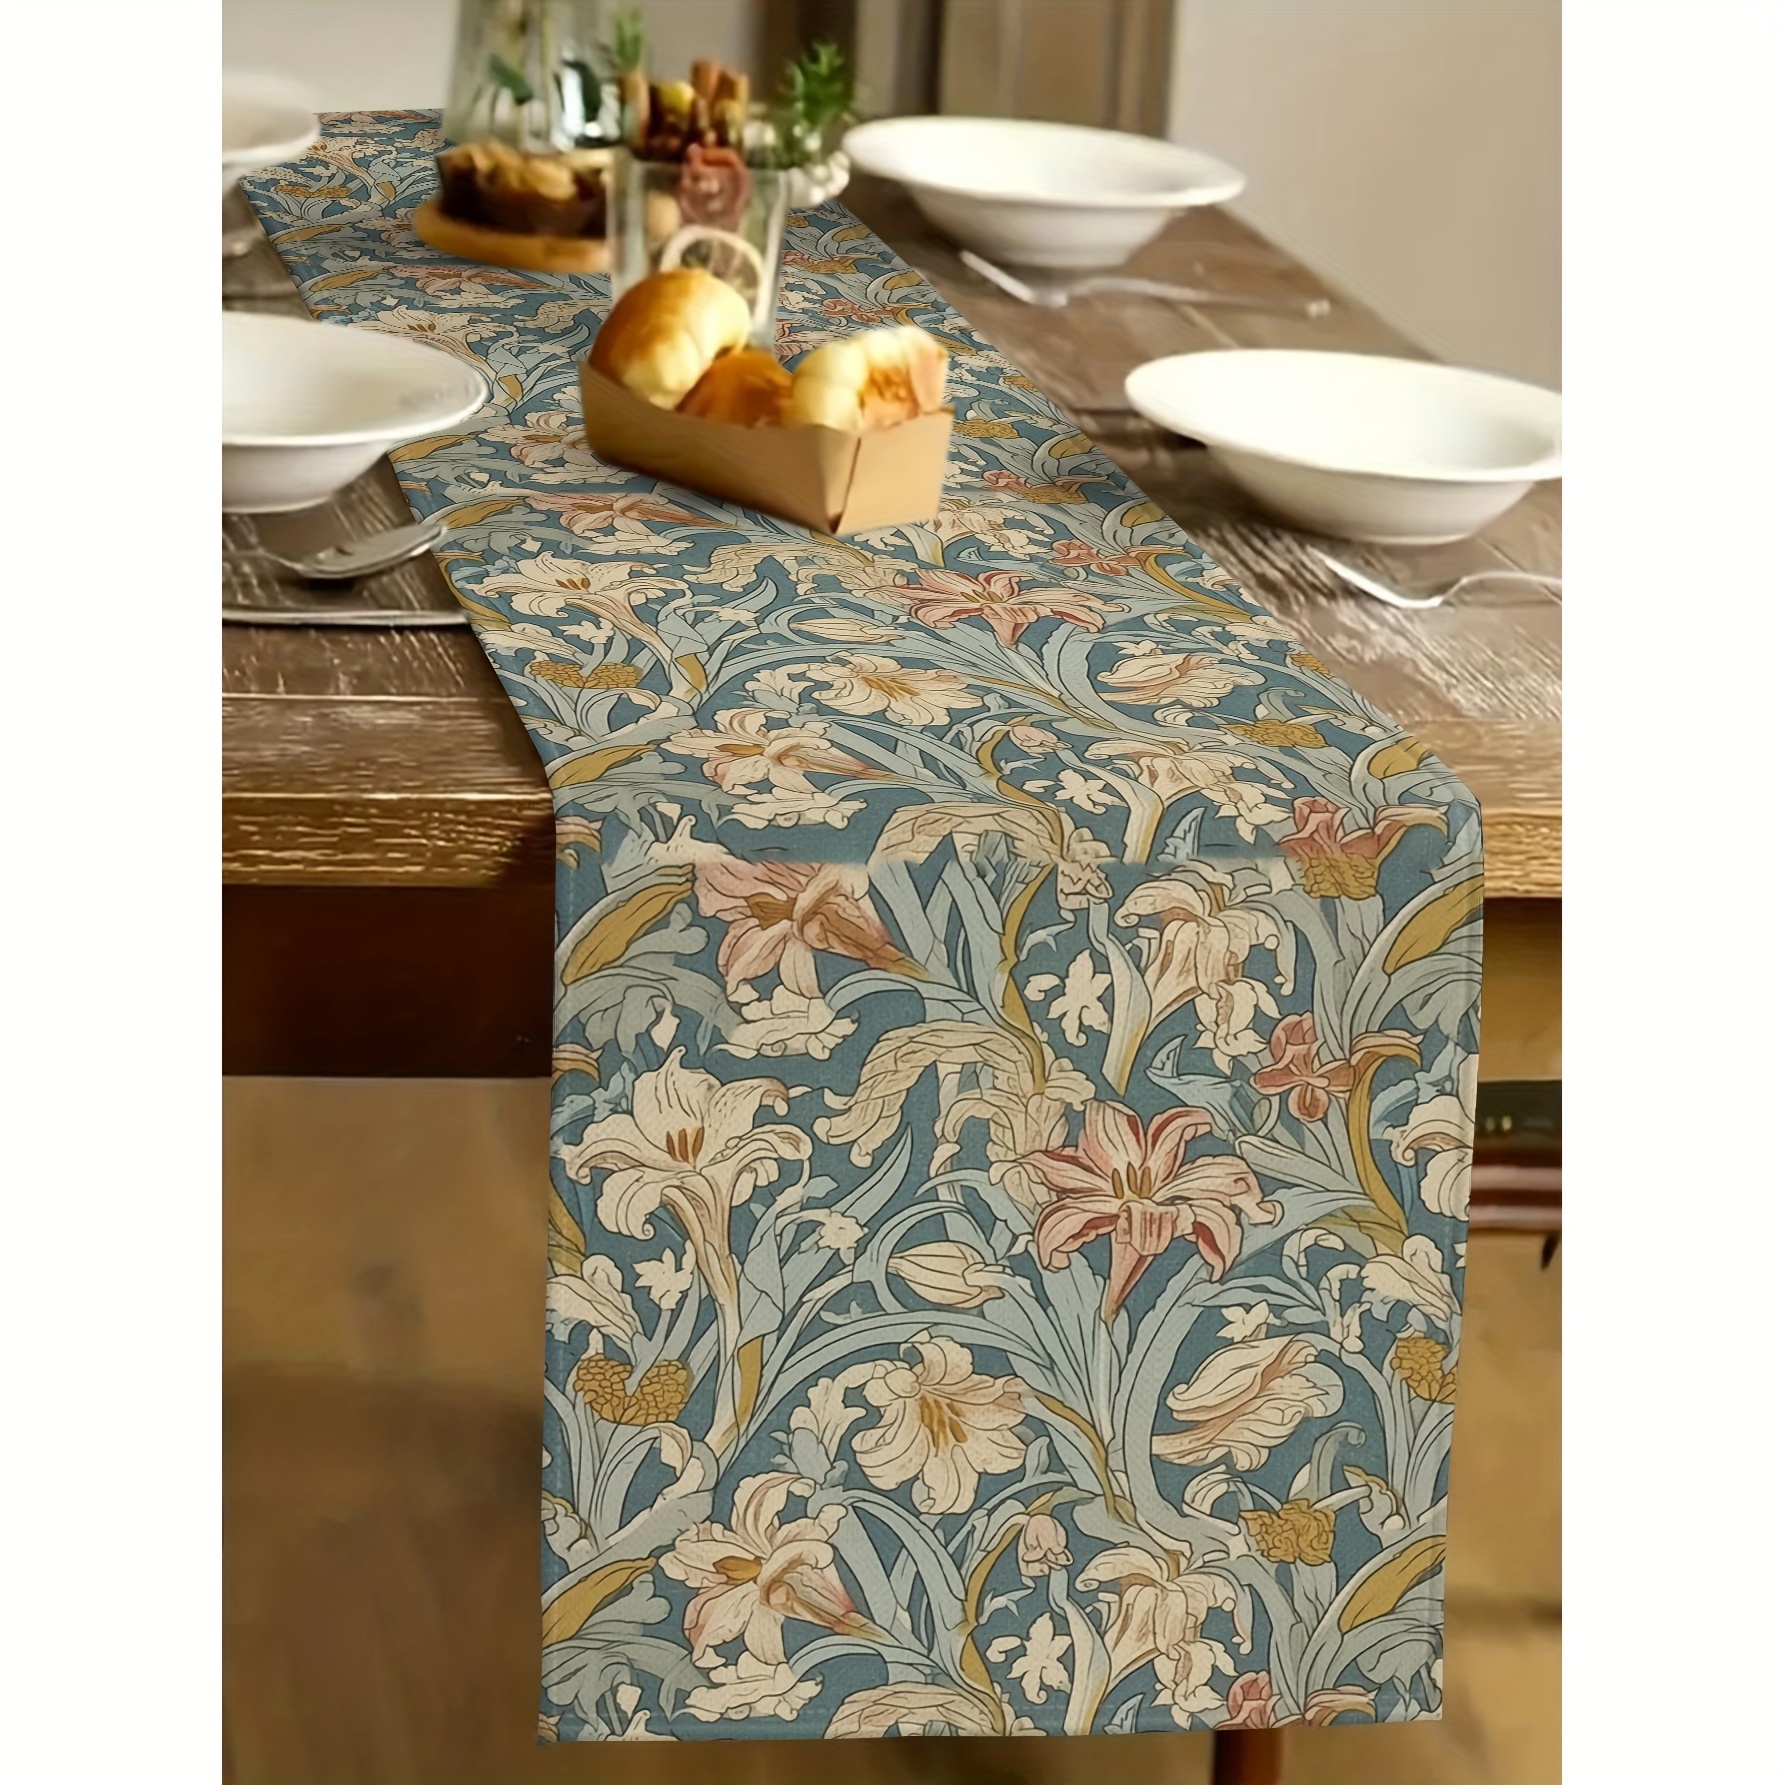 

Floral Linen Table Runner - 100% Knitted Linen Fabric, Rectangular Flower Pattern, Elegant Home Dining Decor, Dustproof & Party Tableware Accessory, 13x72 Inches - Jit 1pc